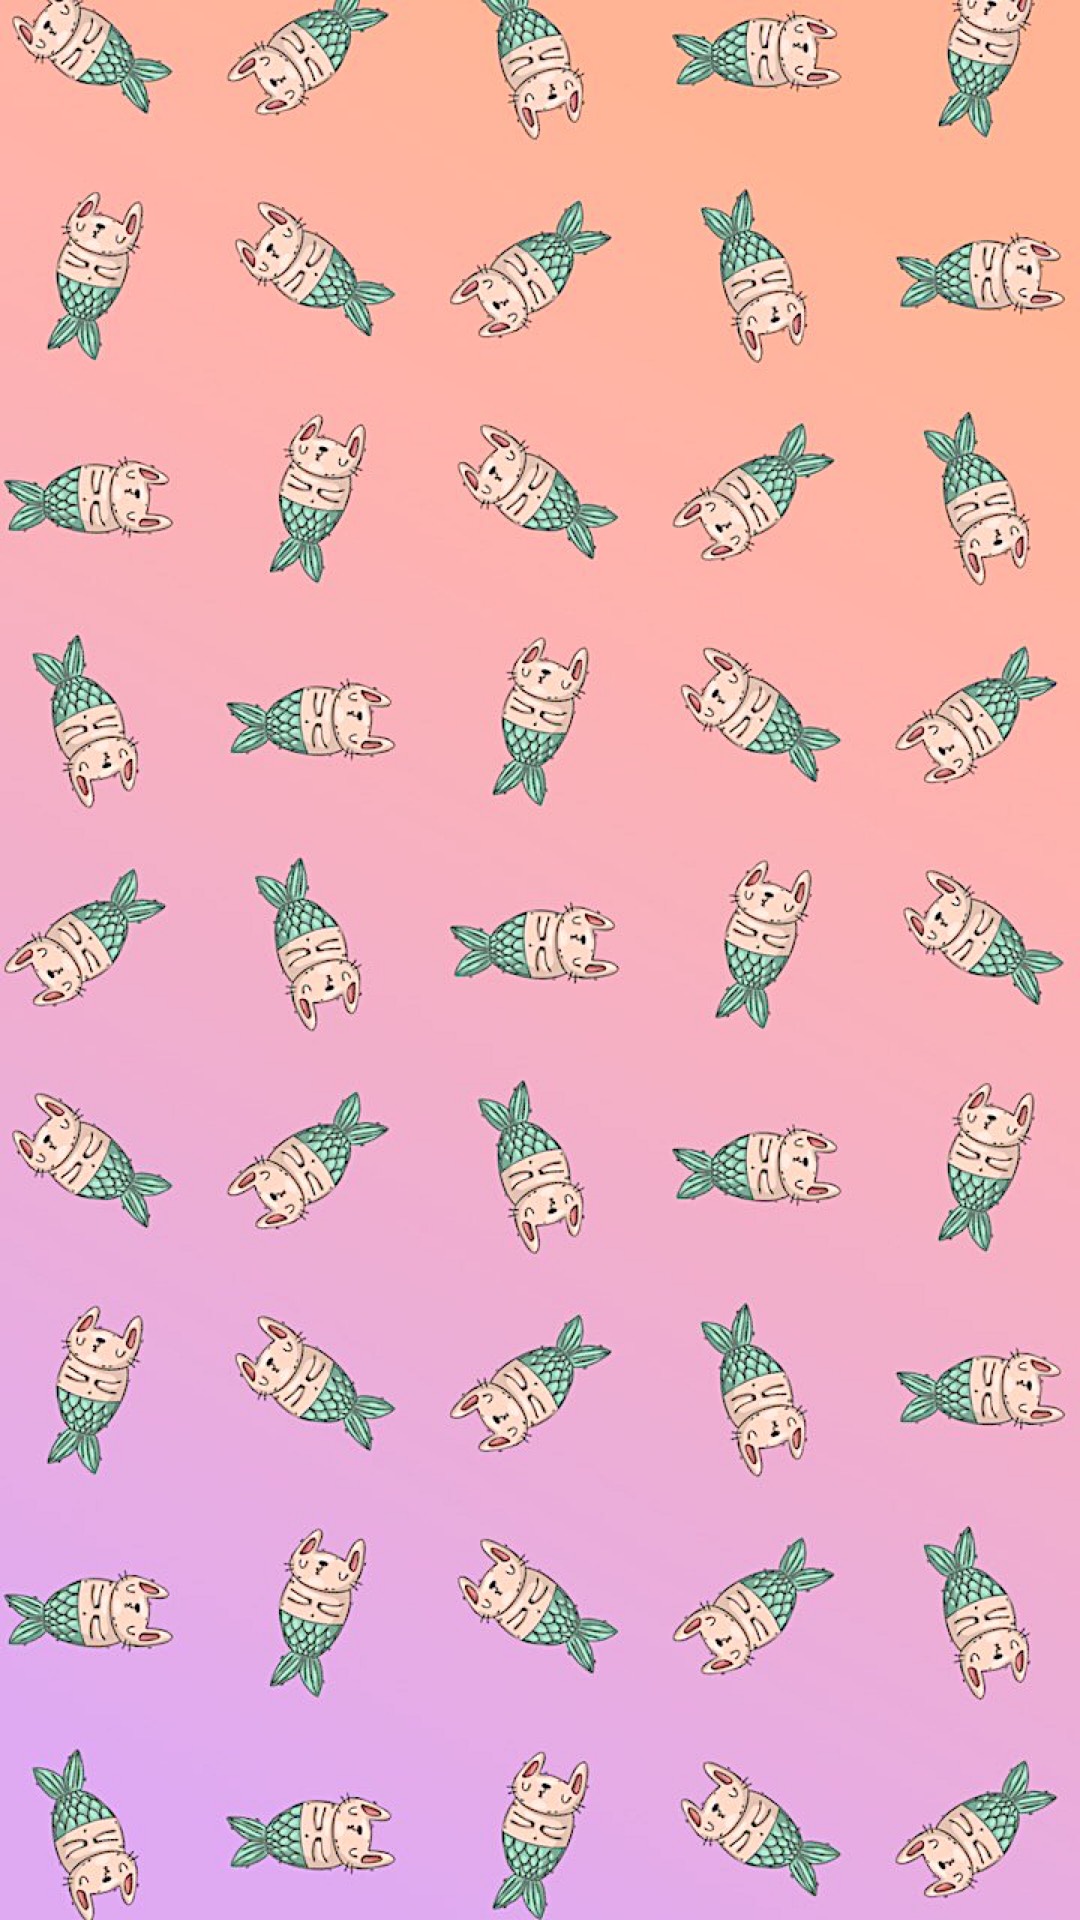 A Group Of Fish Floating On Top Of A Purple And Pink Background Zoom Backgrounds Template